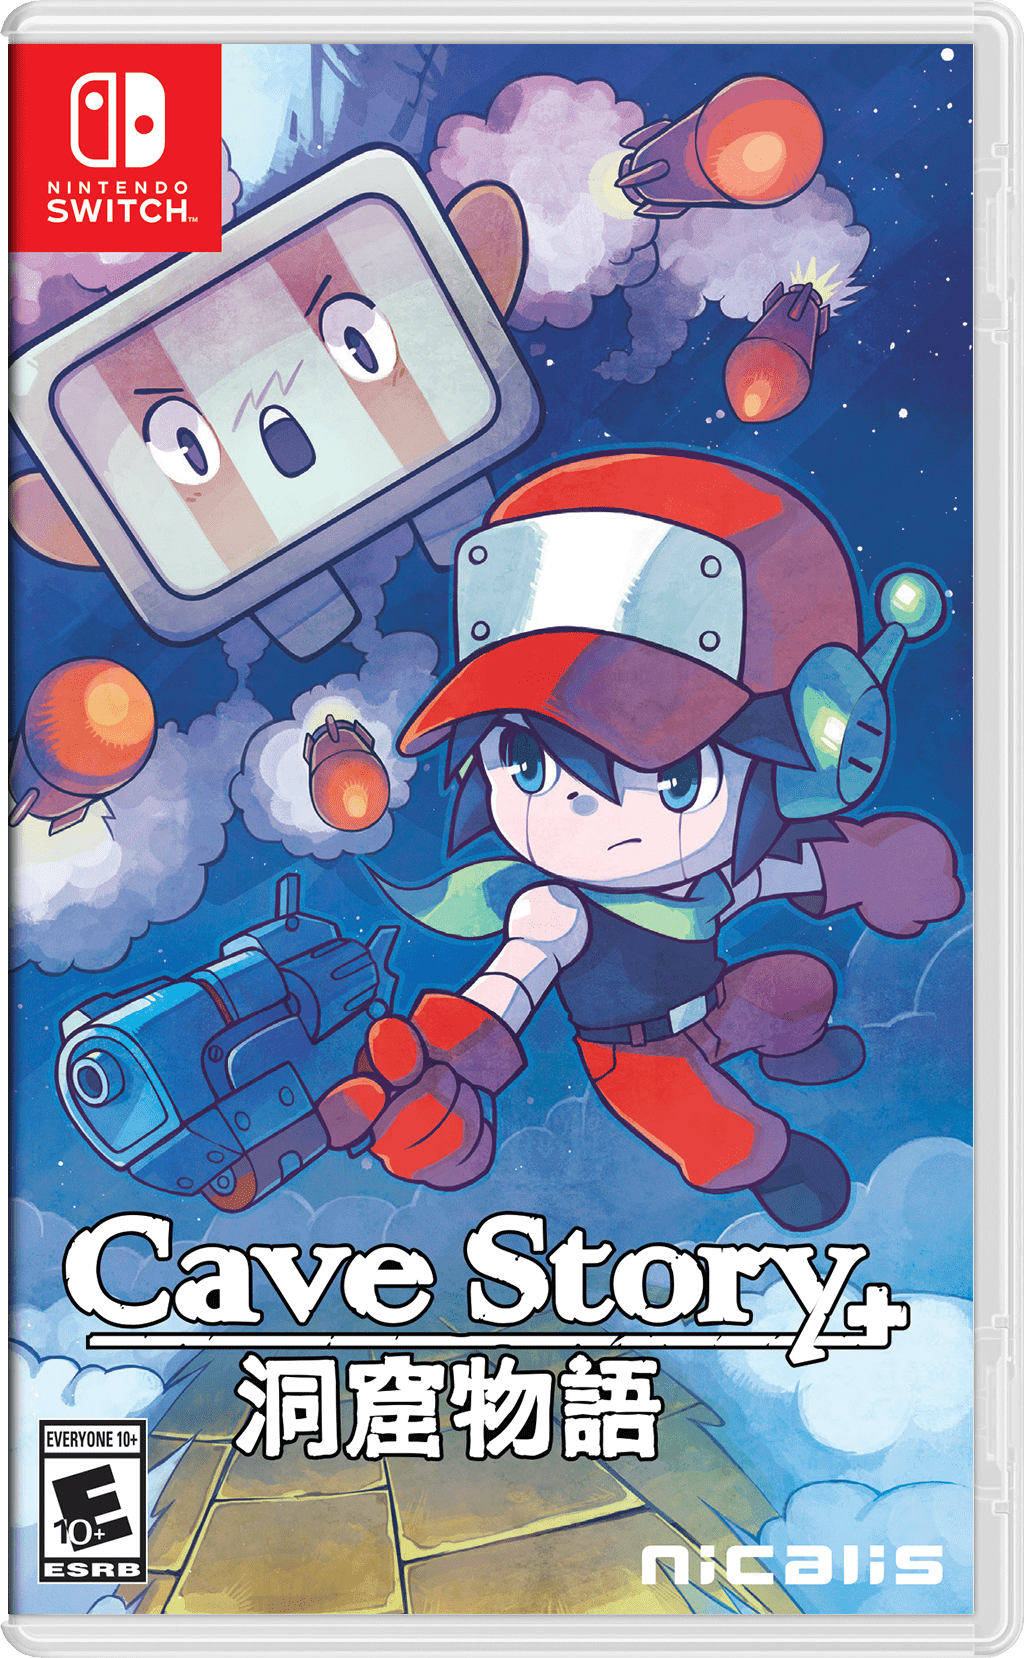 cave story download android